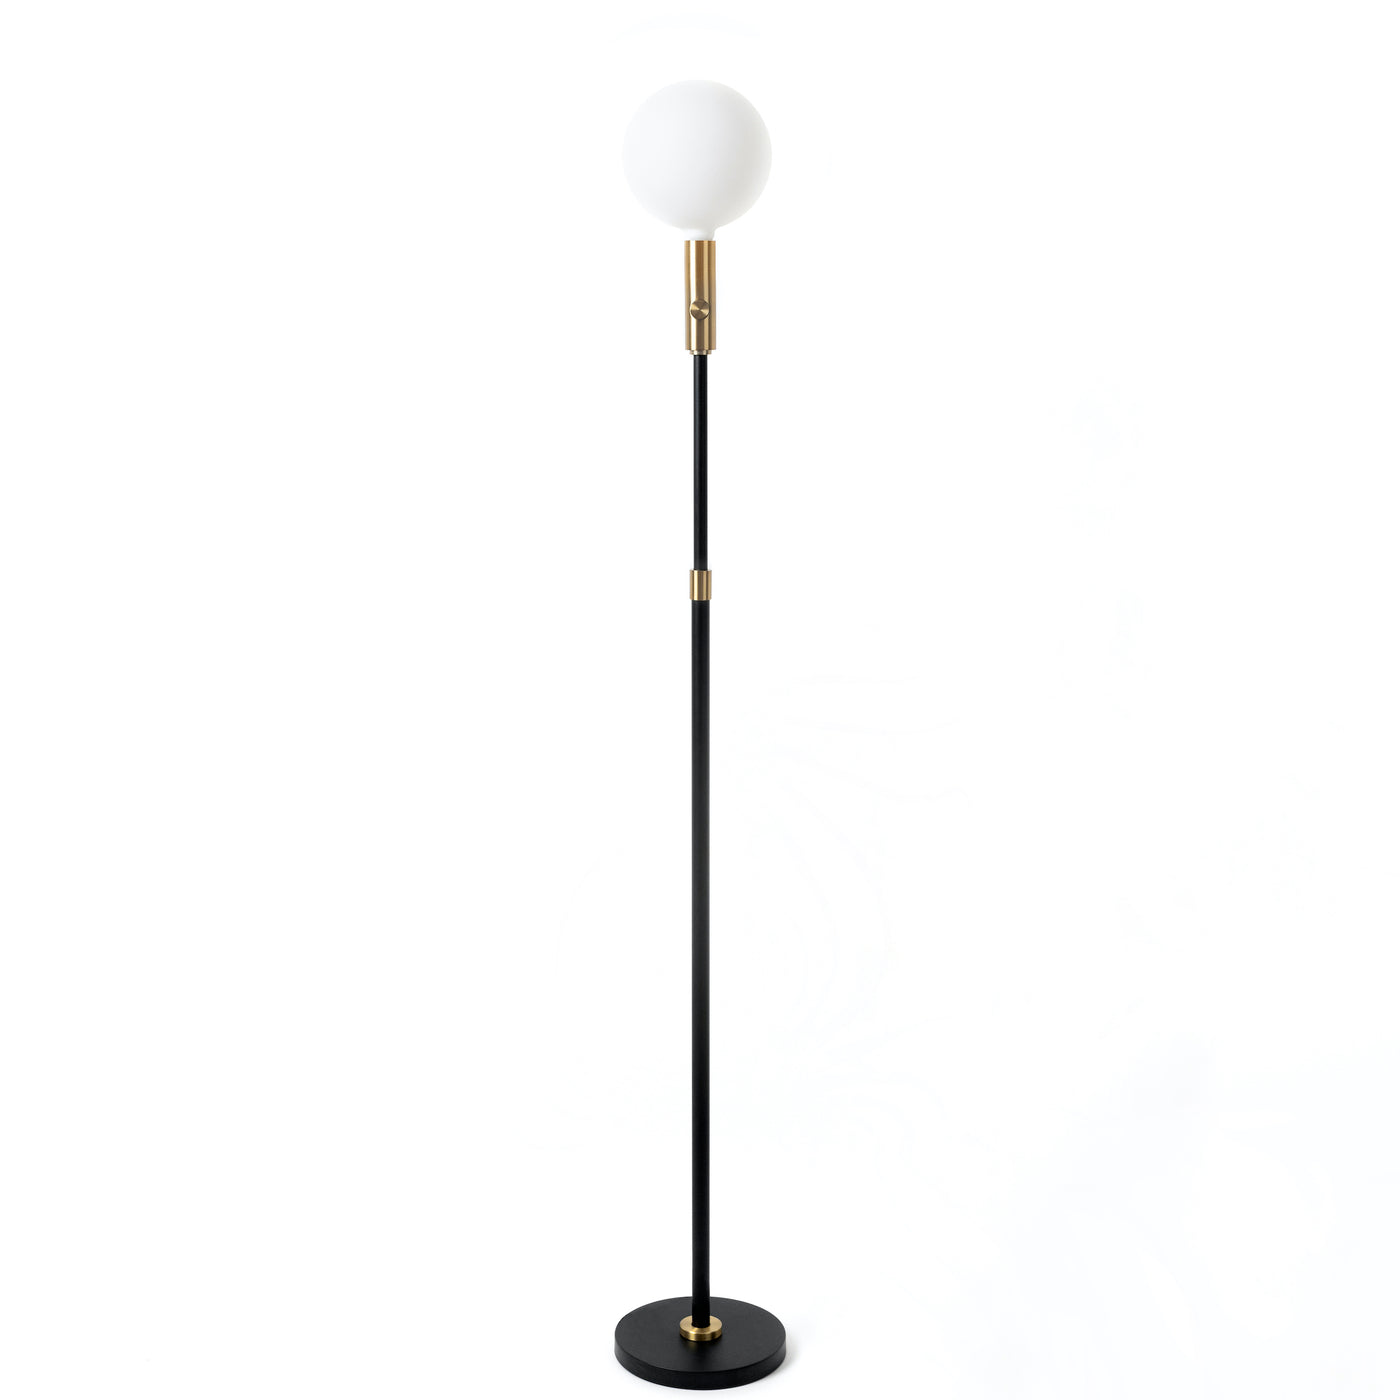 Tala Poise Floor Lamp. Free UK delivery at someday designs. #colour_brass